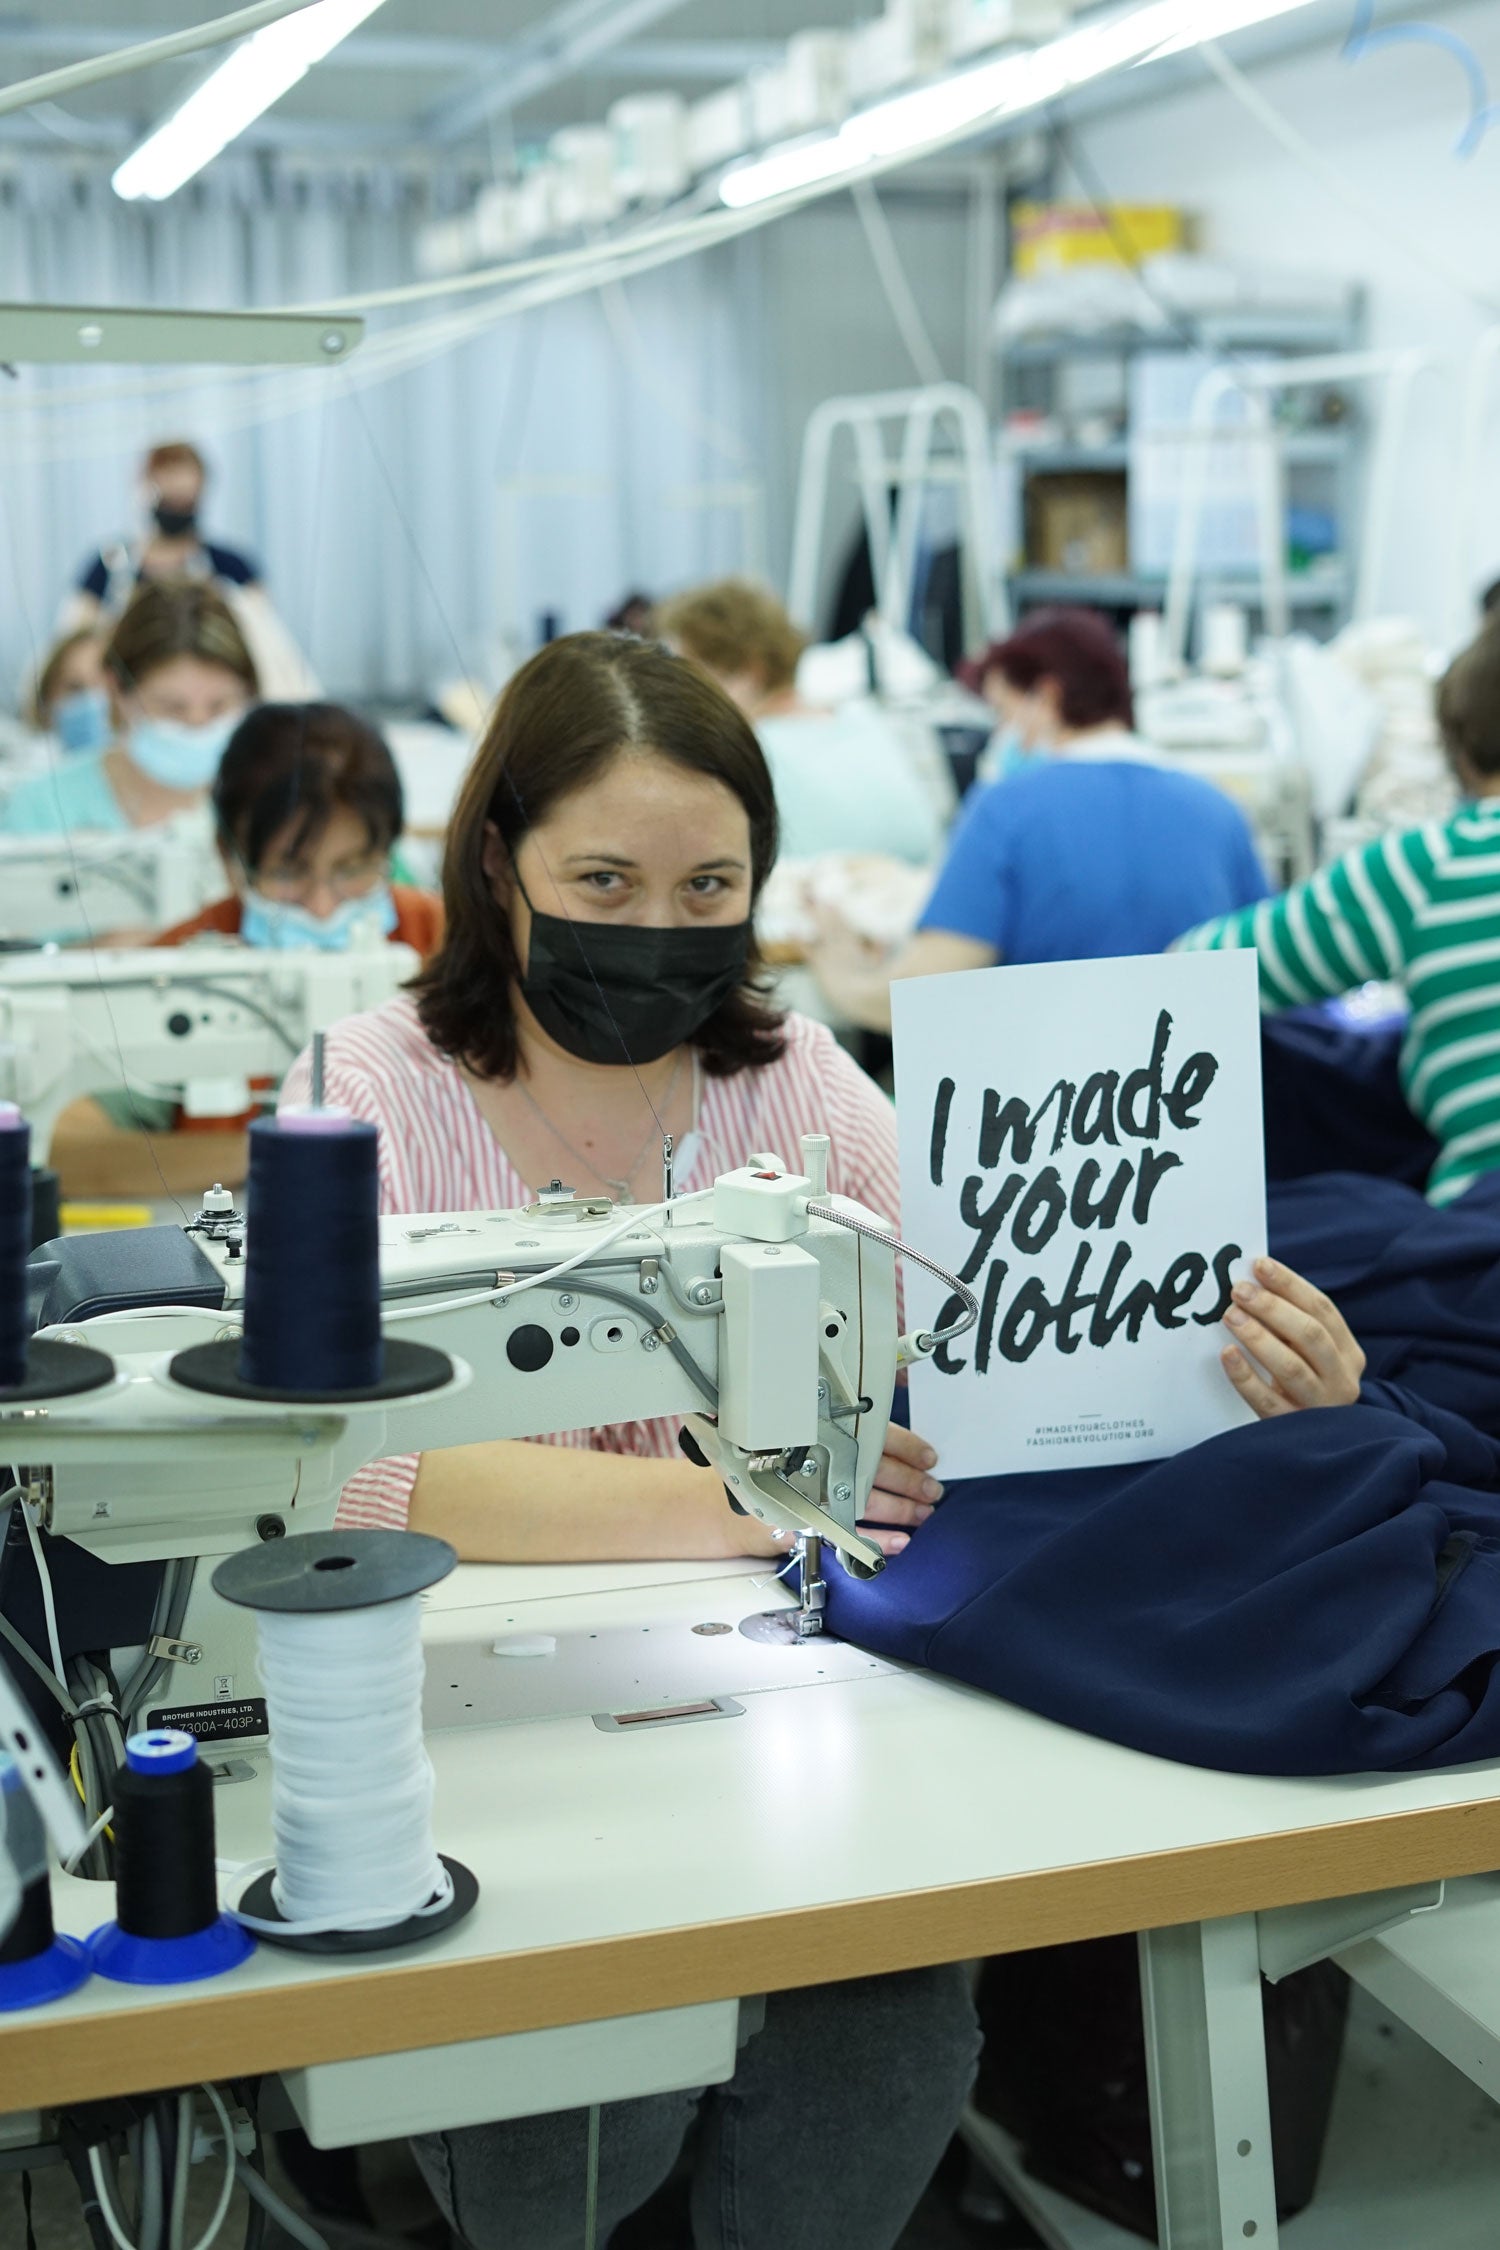 Machinist sits behind a sewing machine in a garment factory, wearing a mask, holding a sign that reads 'I made your clothes' Image is from our garment maker, Mantra, in Romania.